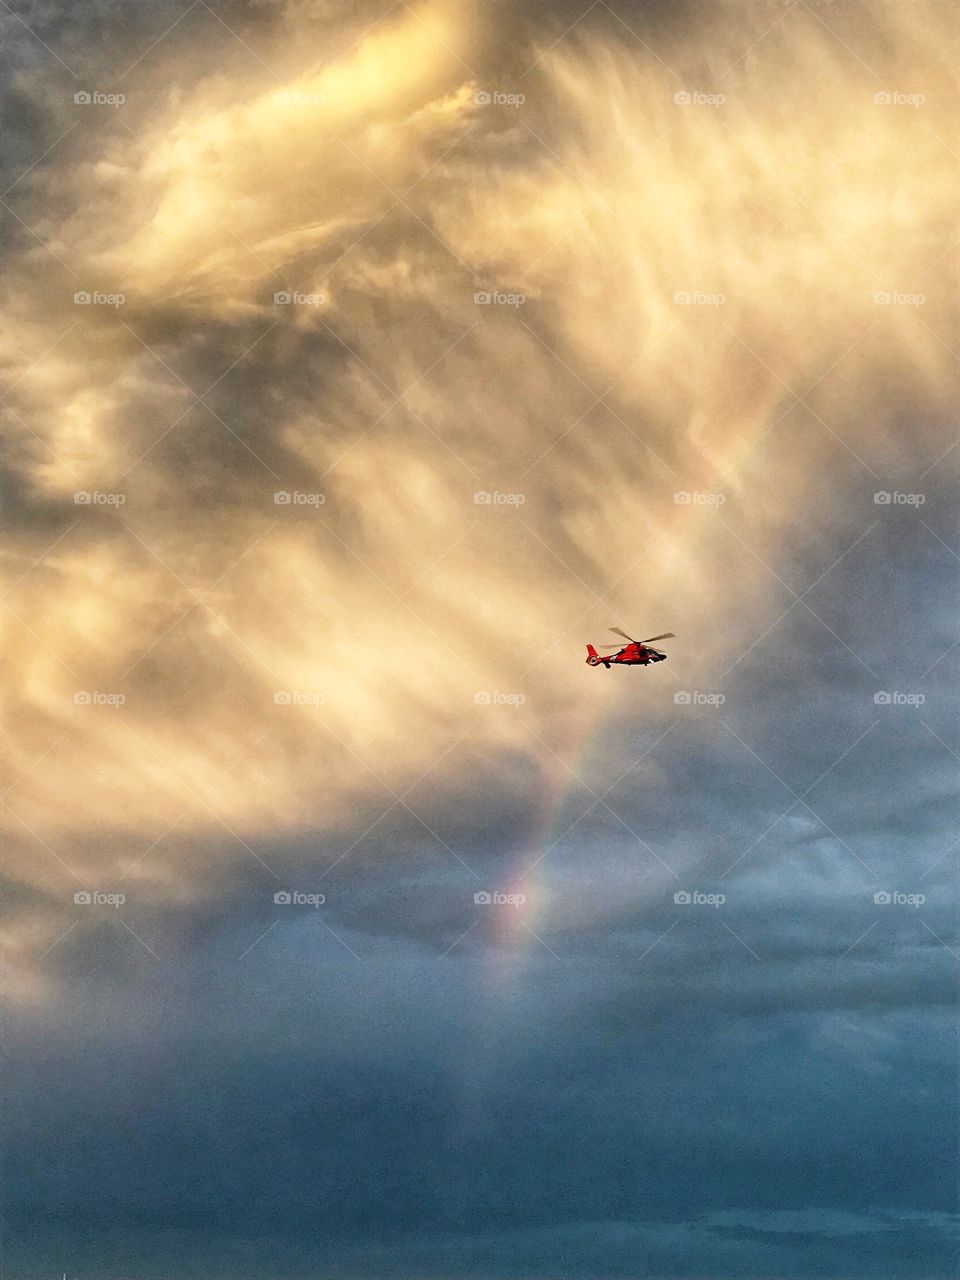 Watching a helicopter fly among clouds and a rainbow 